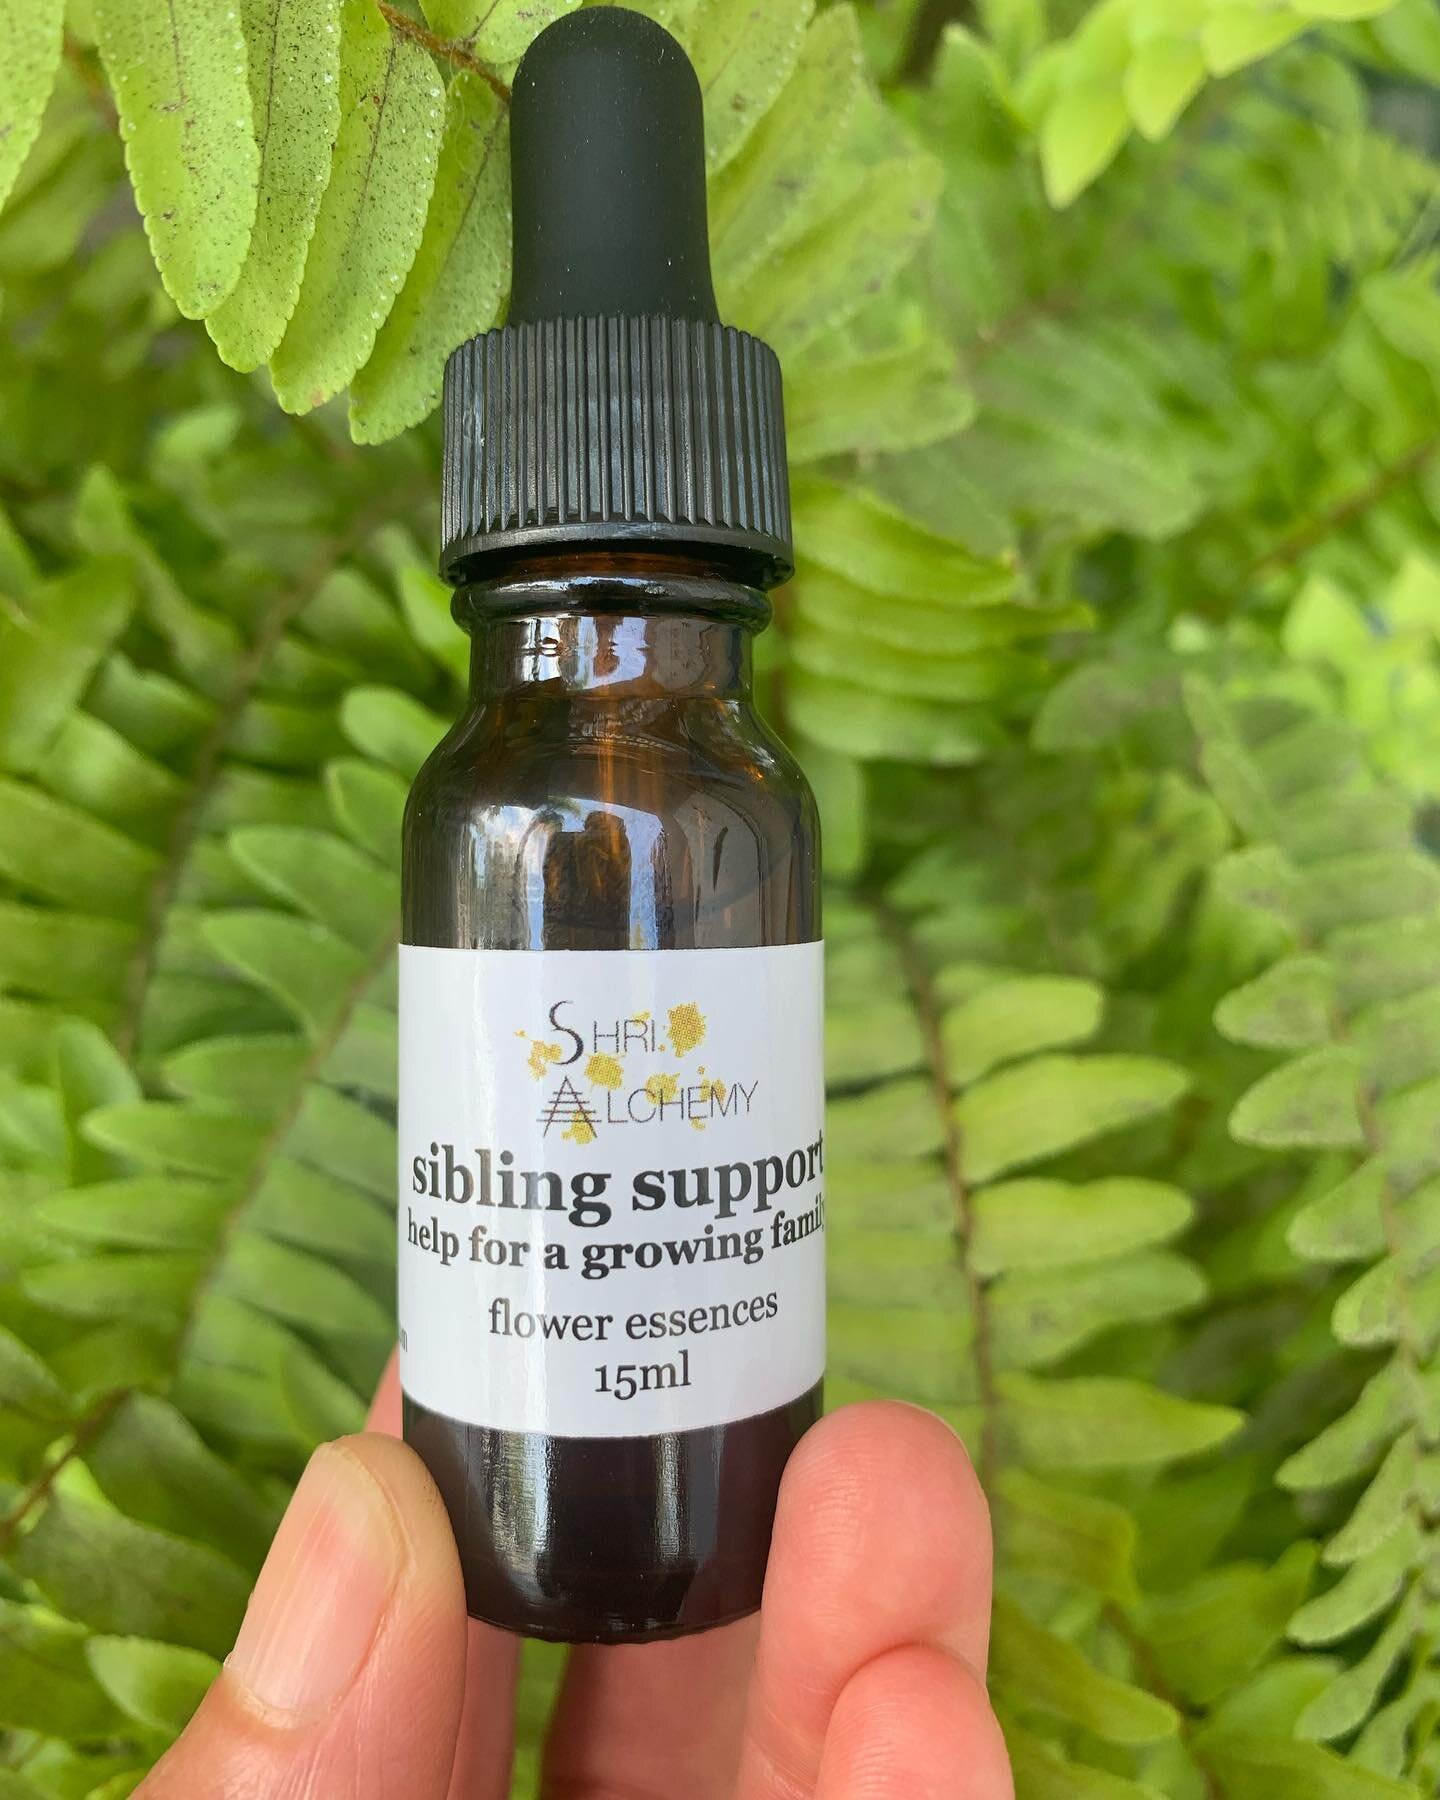 New Product Alert 🚨 
Sibling Support is a flower essences formula created to help growing or changing families! Helps with big complicated feelings for little ones like jealousy, envy, anger, irritation, impatience or confusion when another little o